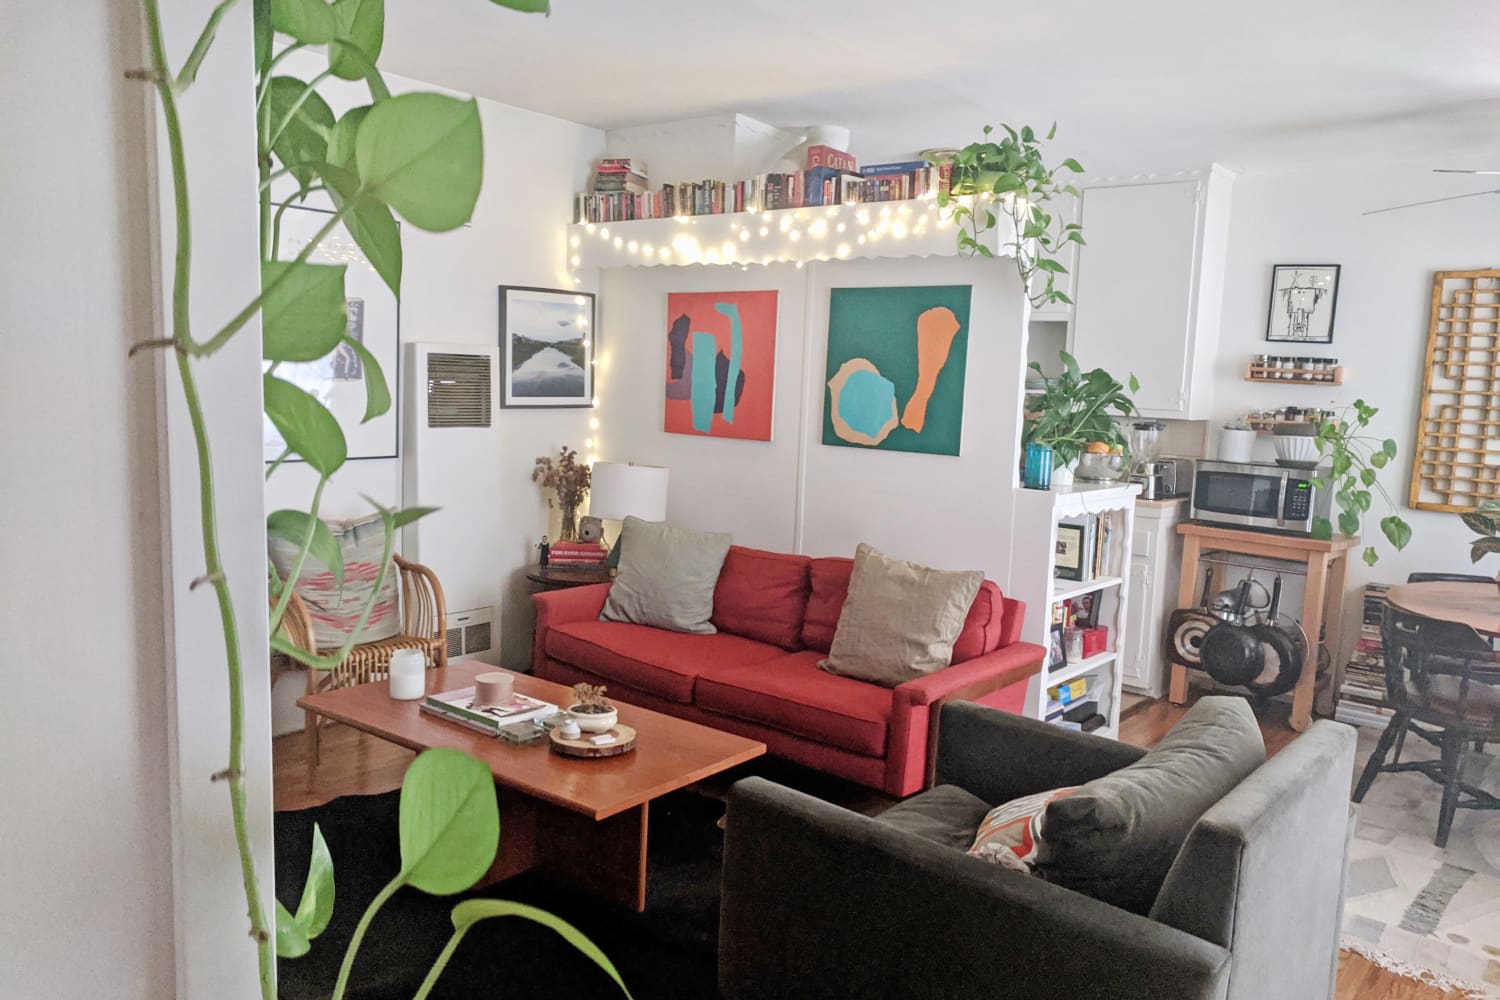 A Shared 450-Square-Foot Rental Apartment Is Small, But Full of Personality